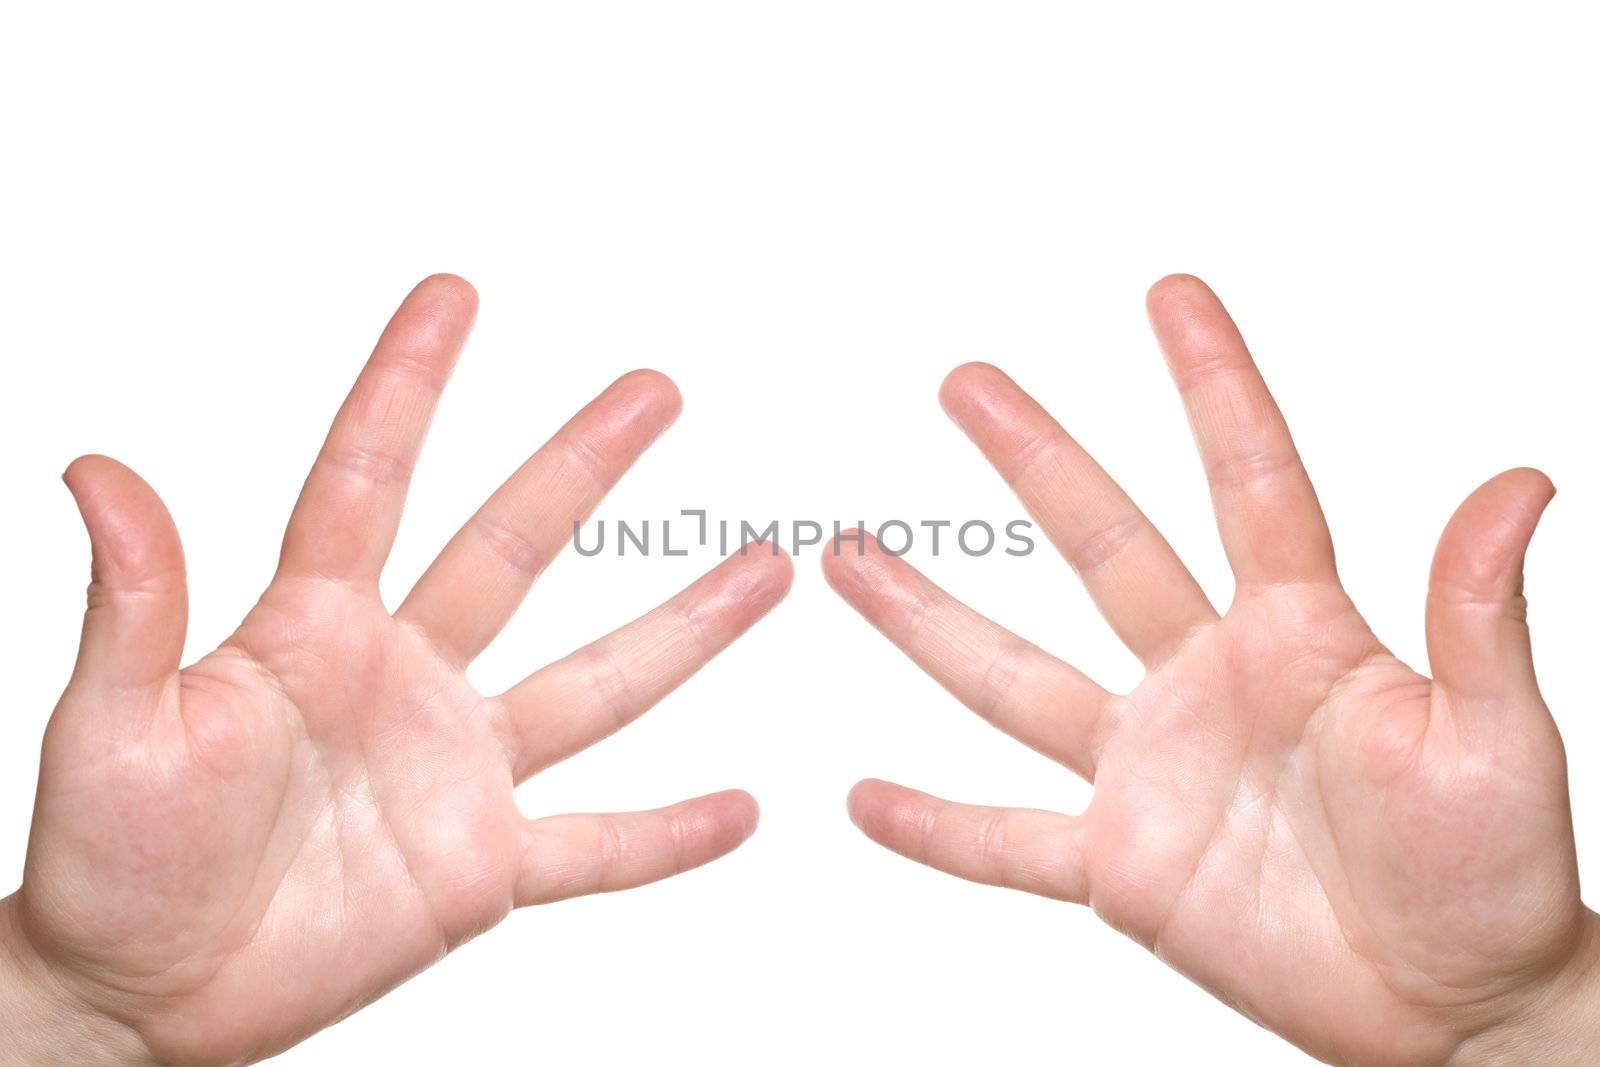 Two palms on a white background. The hands